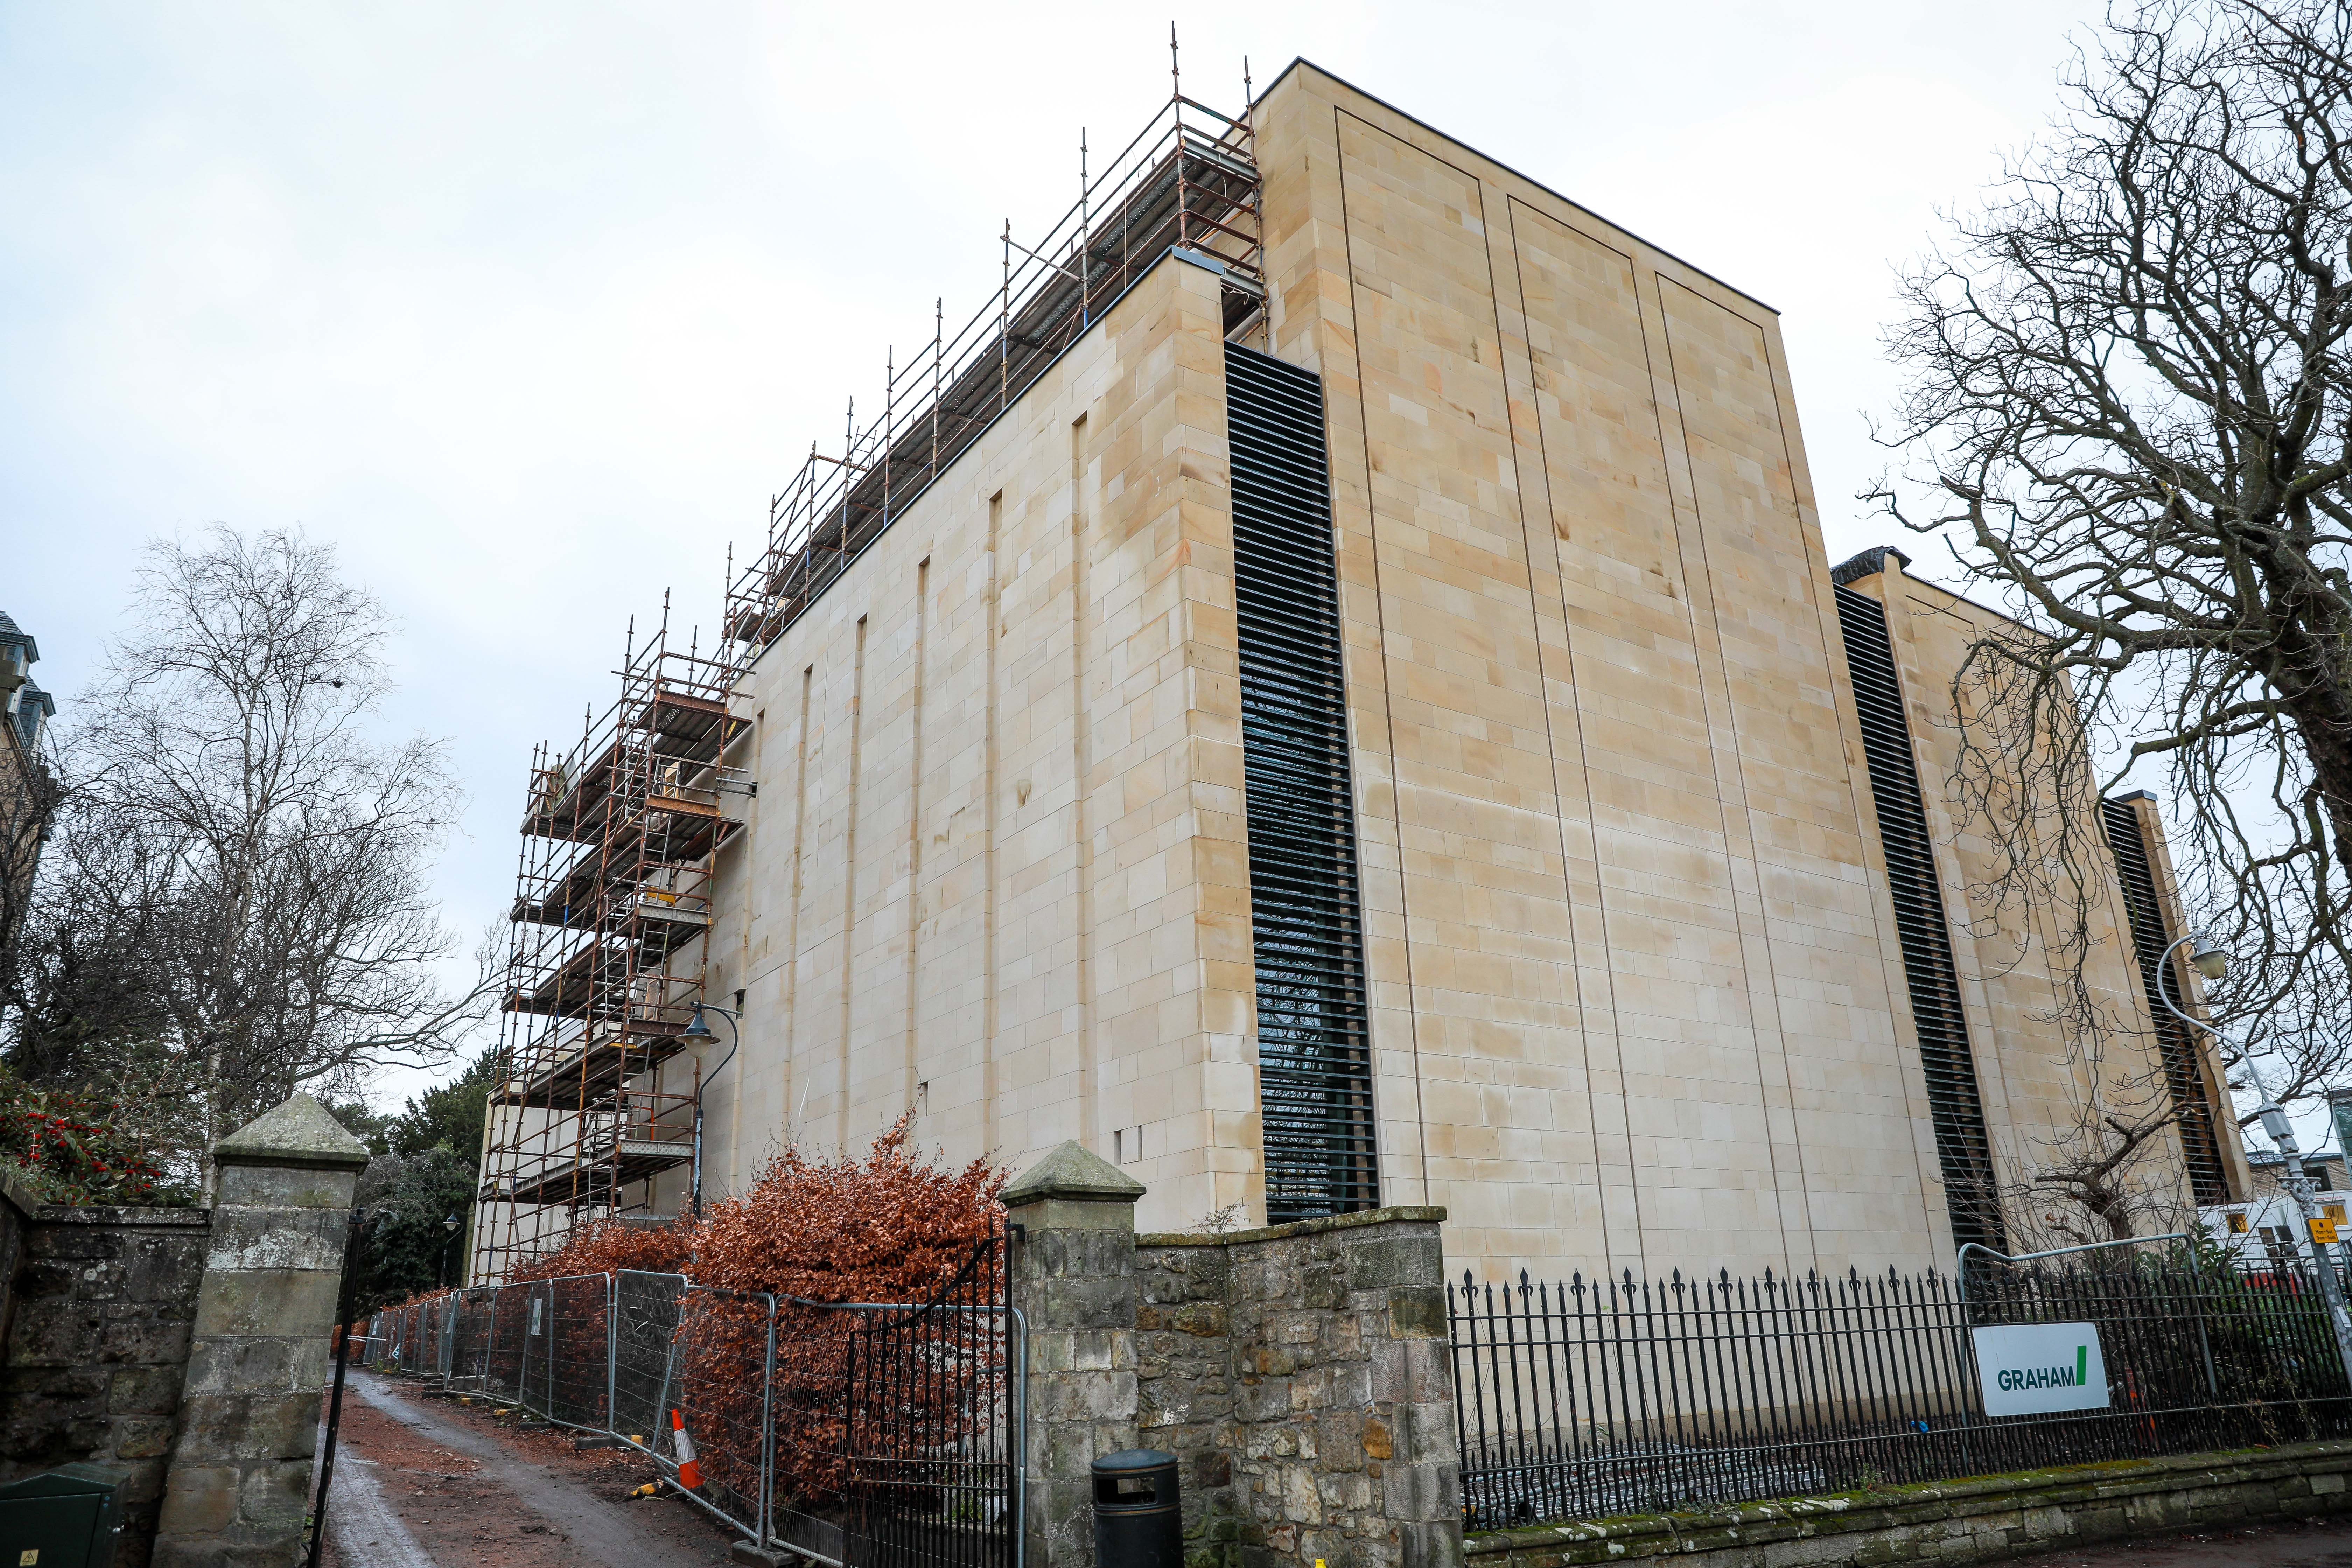 The man fell from a ladder in Queens Terrace, where a new music centre is being built for St Andrews University.